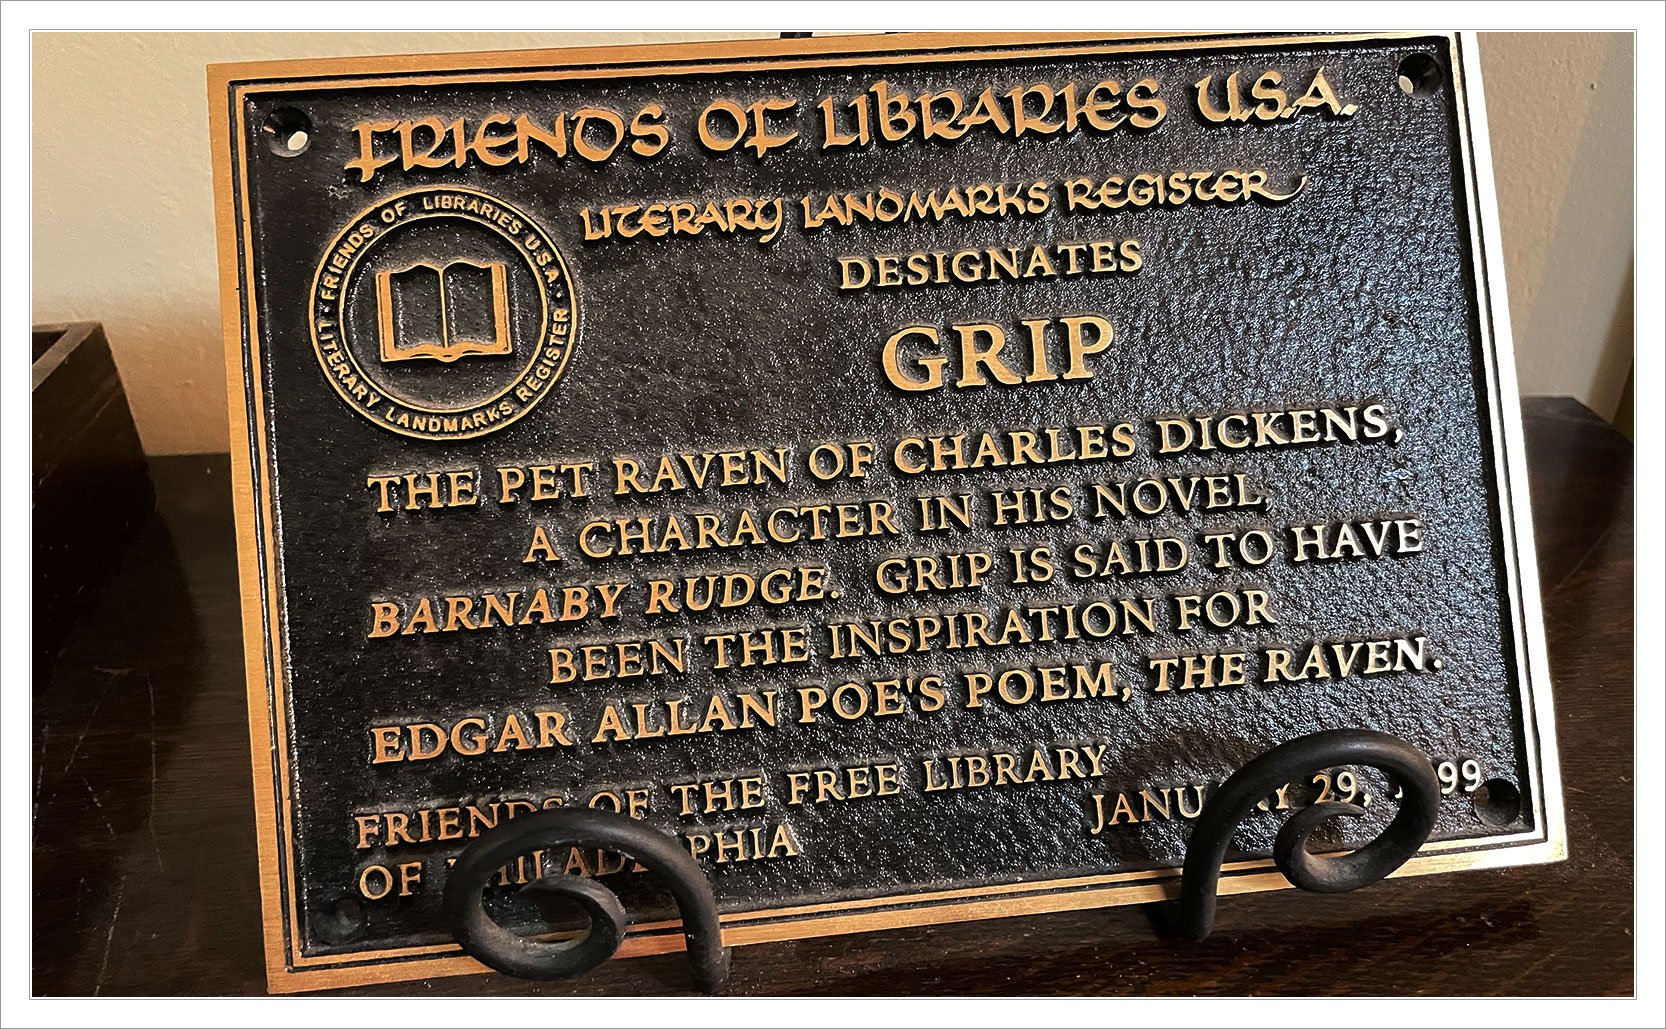 Plaque from the Friends of Libraries